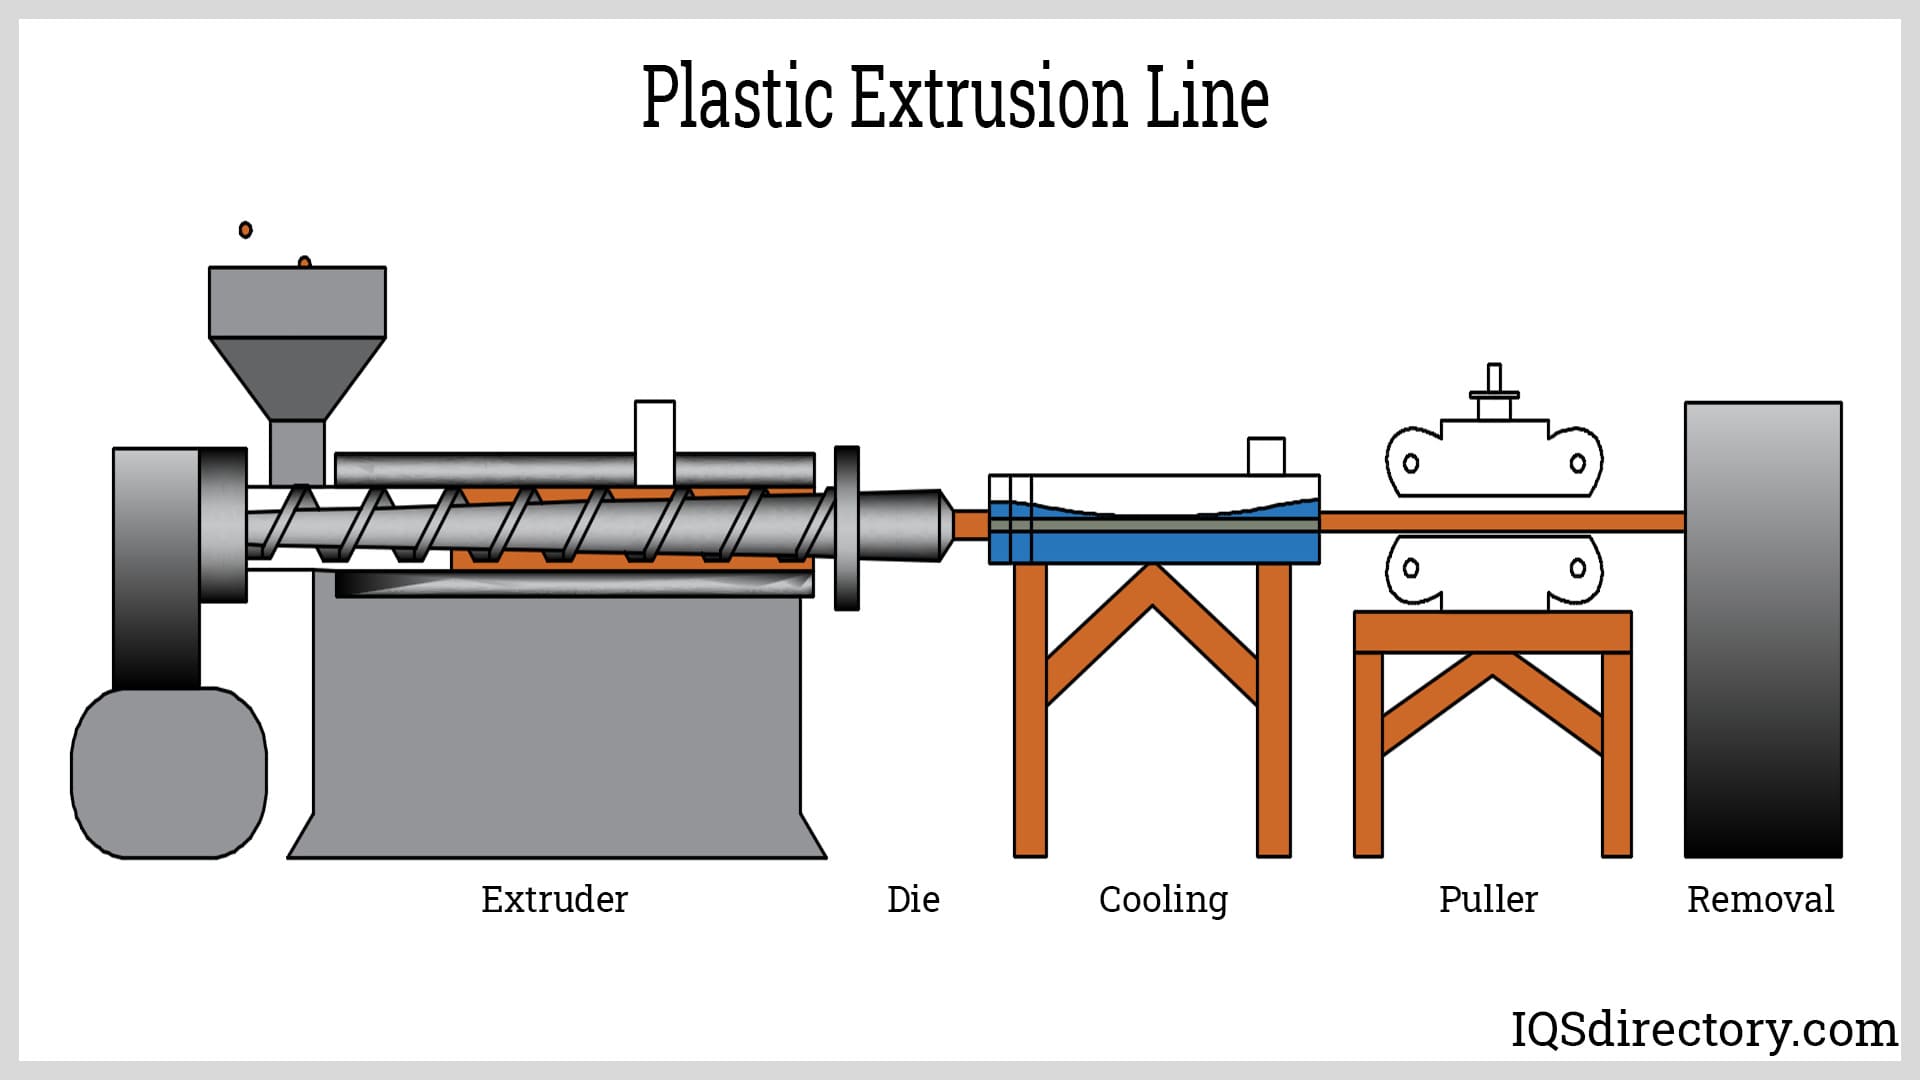 Plastic Extrusion: What Is It? How Does It Work? Process